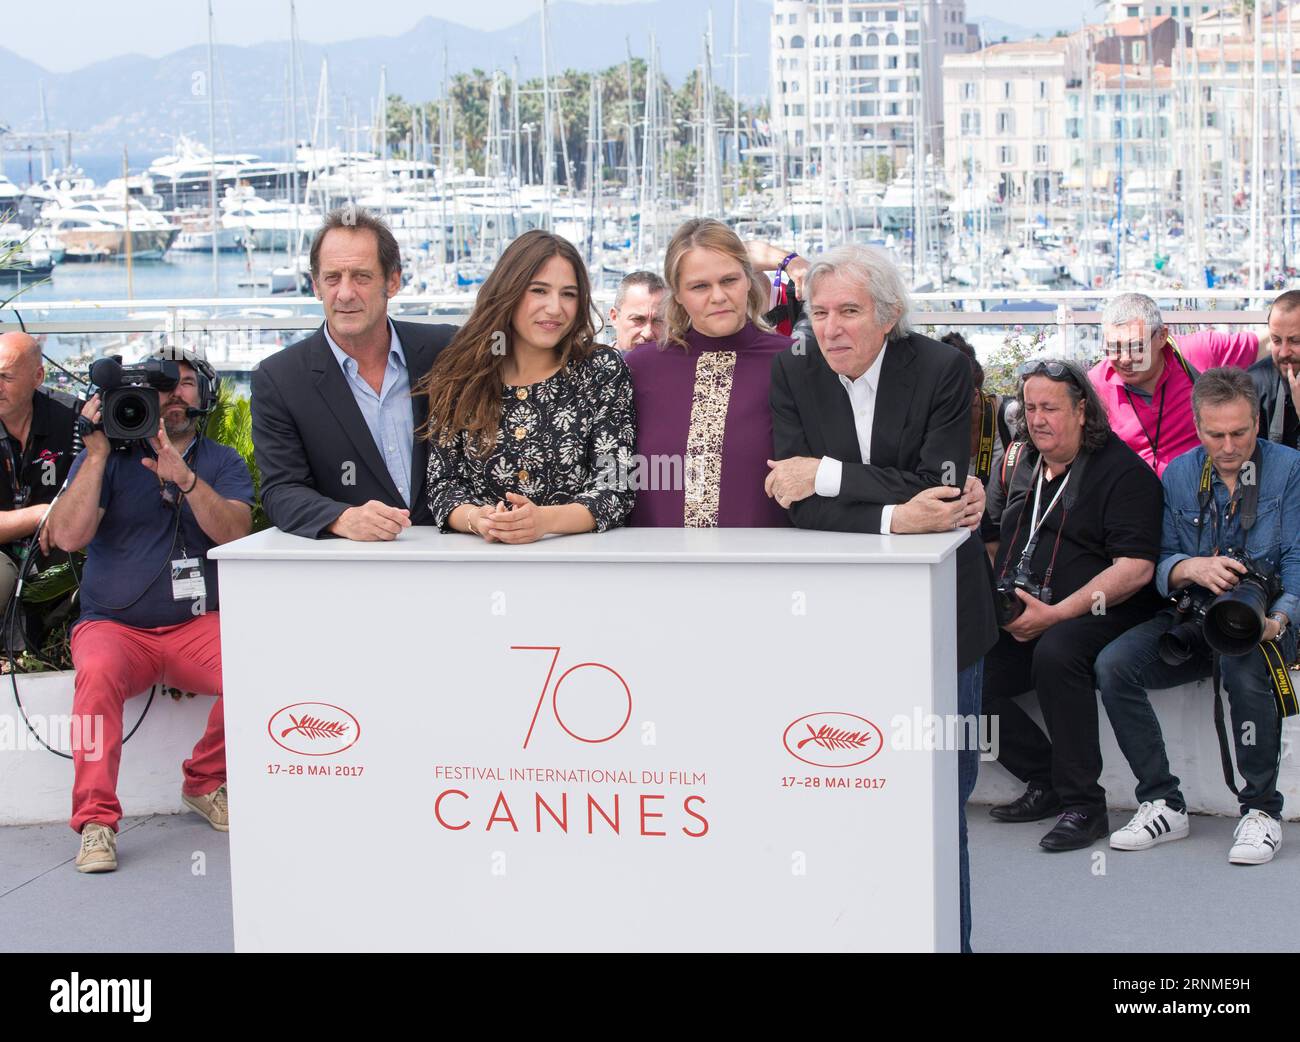 (170524) -- CANNES, May 24, 2017 -- French director Jacques Doillon, actors Severine Caneele, Izia Higelin and Vincent Lindon (From R to L) pose for the photocall of the film Rodin during the 70th annual Cannes Film Festival at Palais des Festivals in Cannes, France, on May 24, 2017. ) (lrz) FRANCE-CANNES-70TH CANNES FILM FESTIVAL-RODIN XuxJinquan PUBLICATIONxNOTxINxCHN   Cannes May 24 2017 French Director Jacques Doillon Actors Severine  Izia Higelin and Vincent Lindon from r to l Pose for The photo call of The Film Rodin during The 70th Annual Cannes Film Festival AT Palais the Festivals in Stock Photo